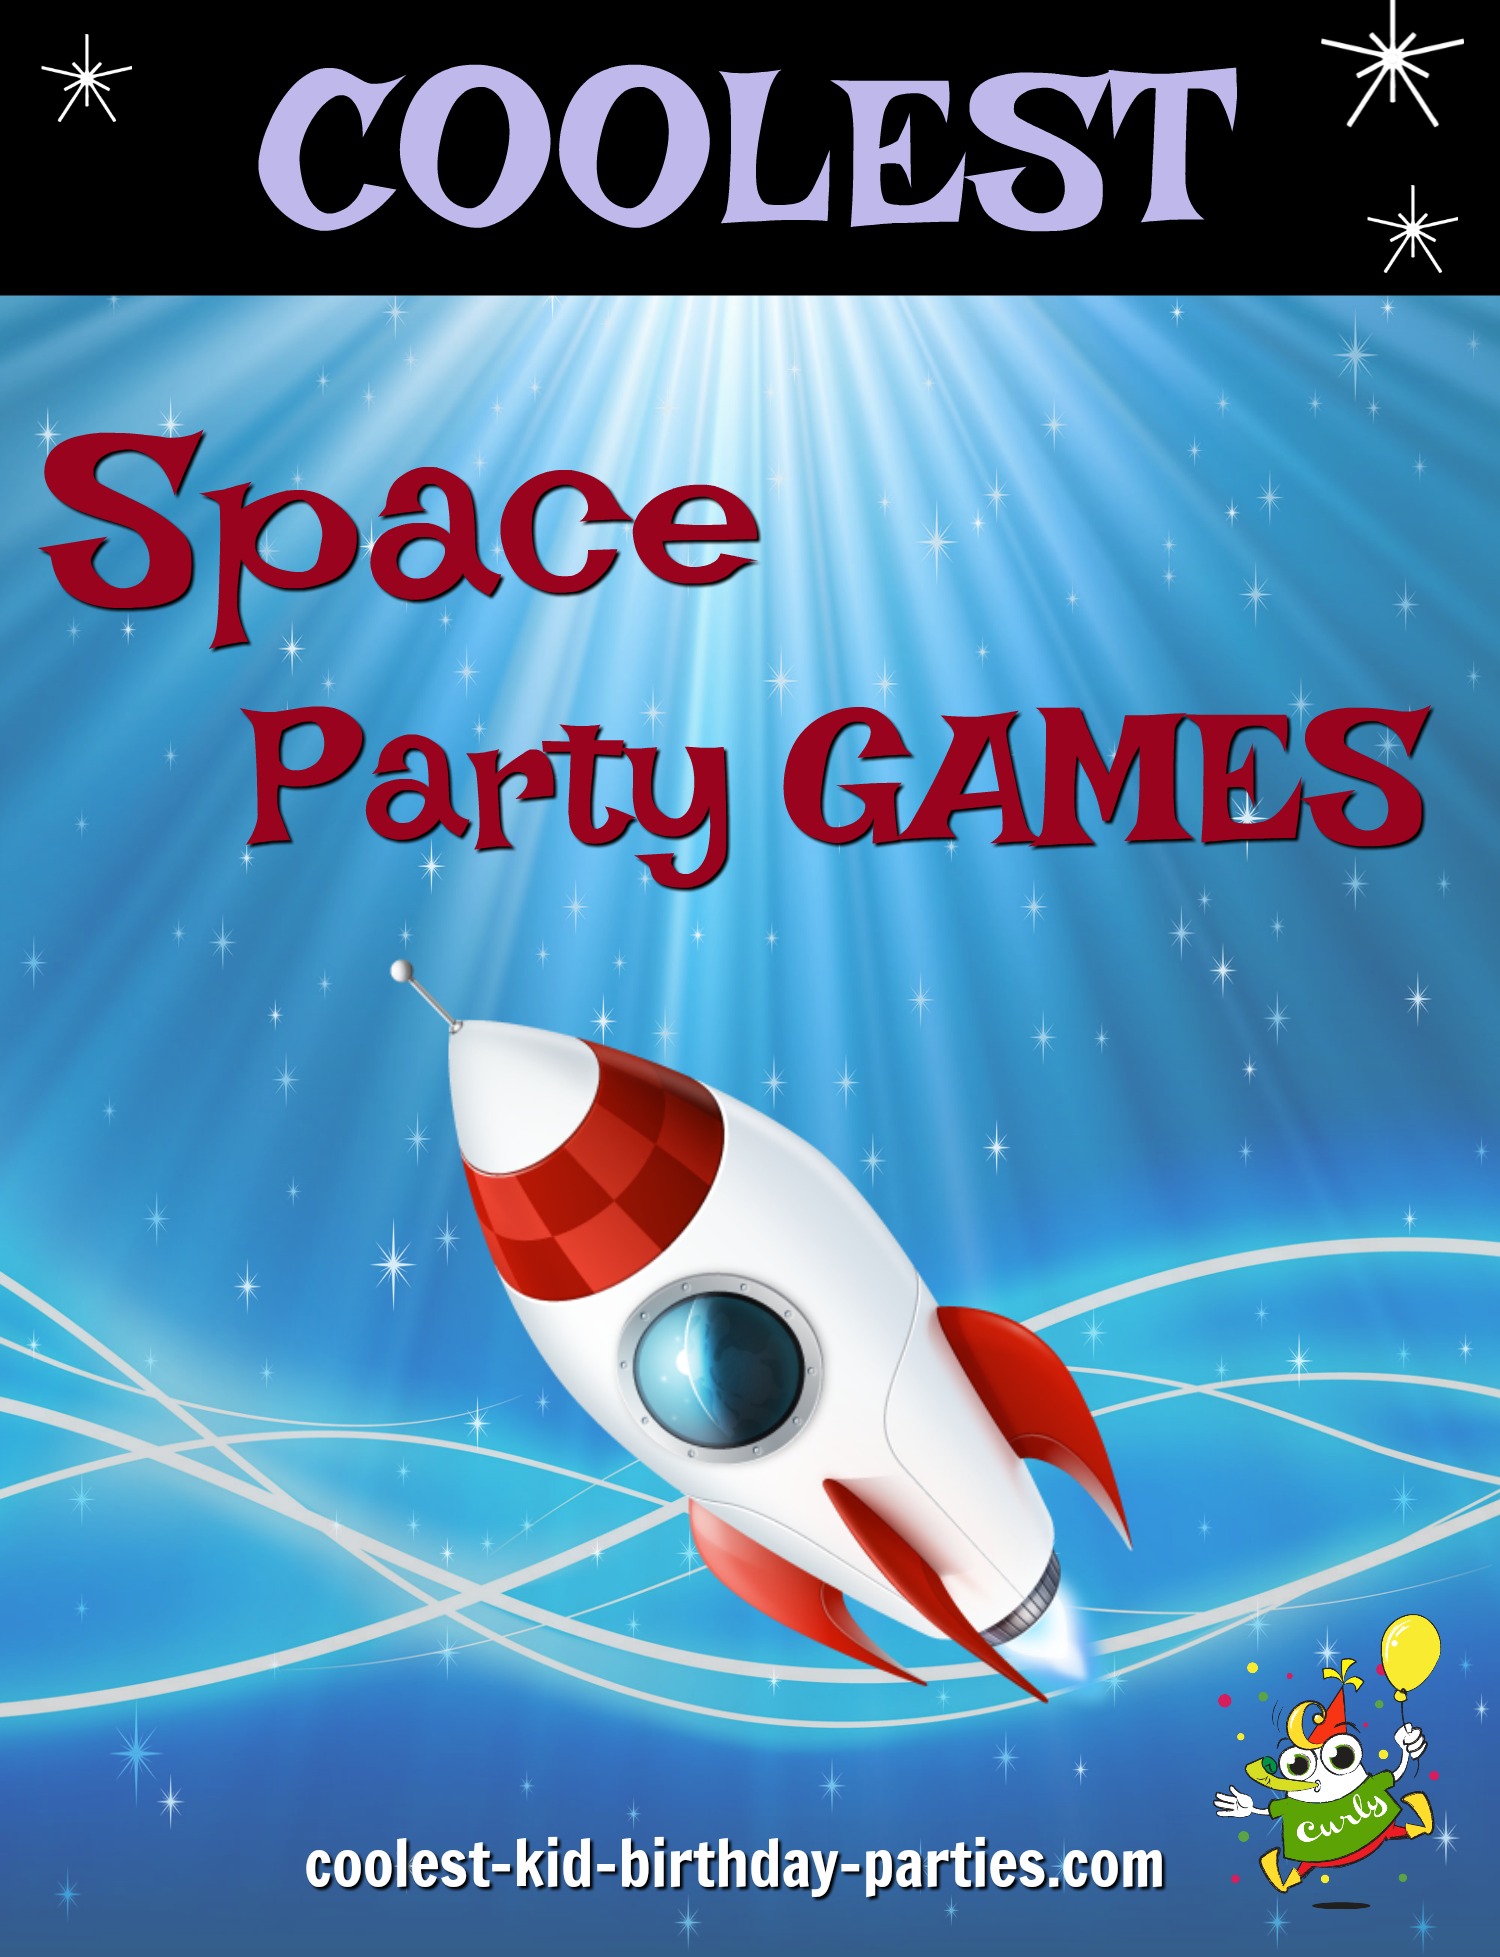 Coolest Space Child Party Games